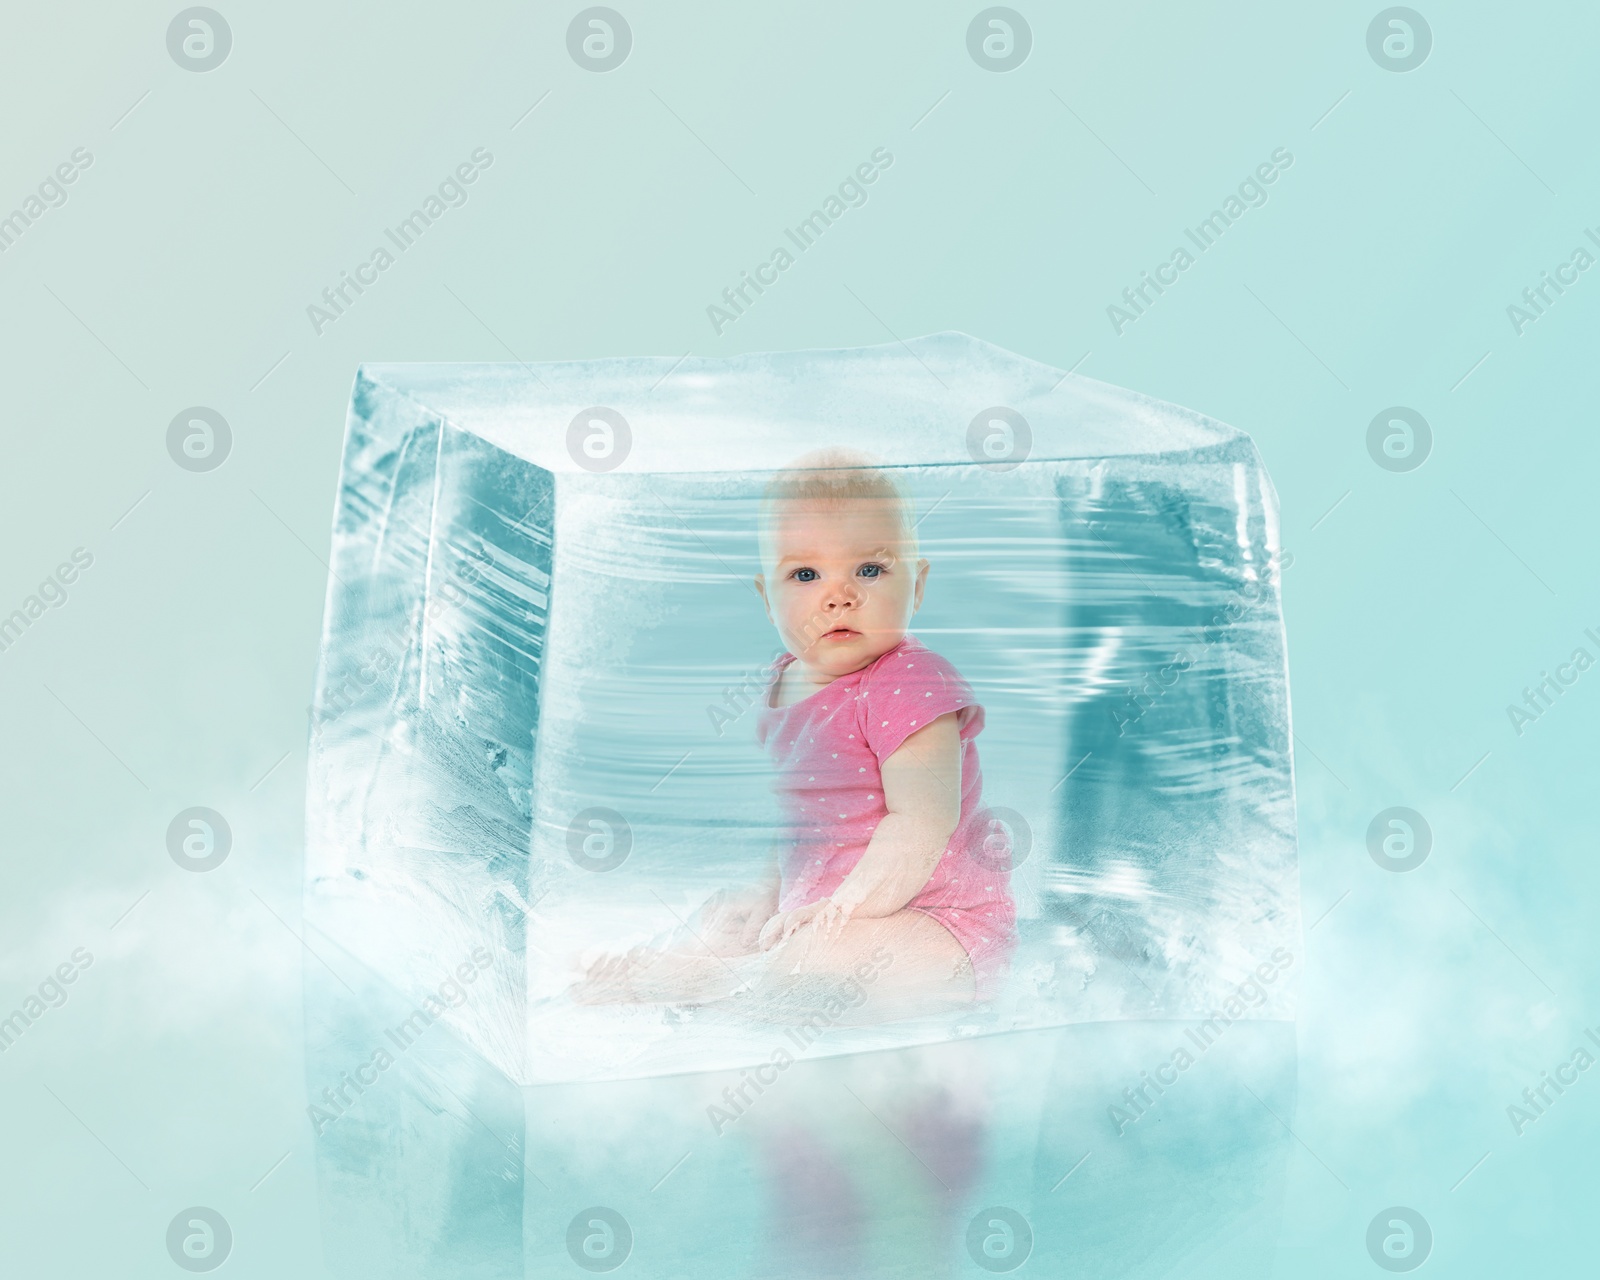 Image of Cryopreservation as method of infertility treatment. Baby in ice cube on light blue background